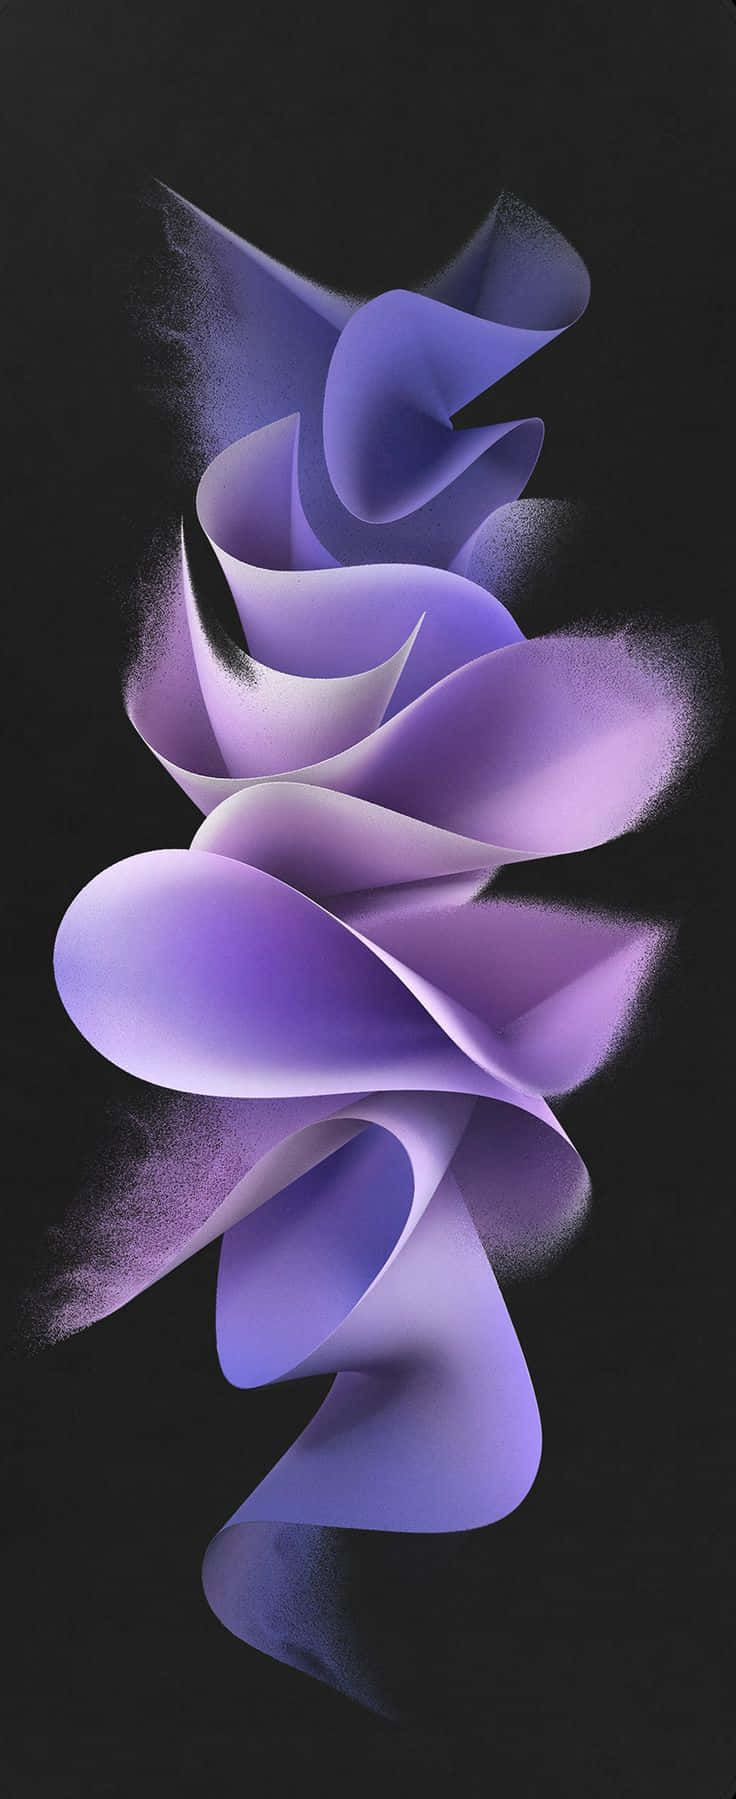 Abstract Purple Floral Artwork Wallpaper